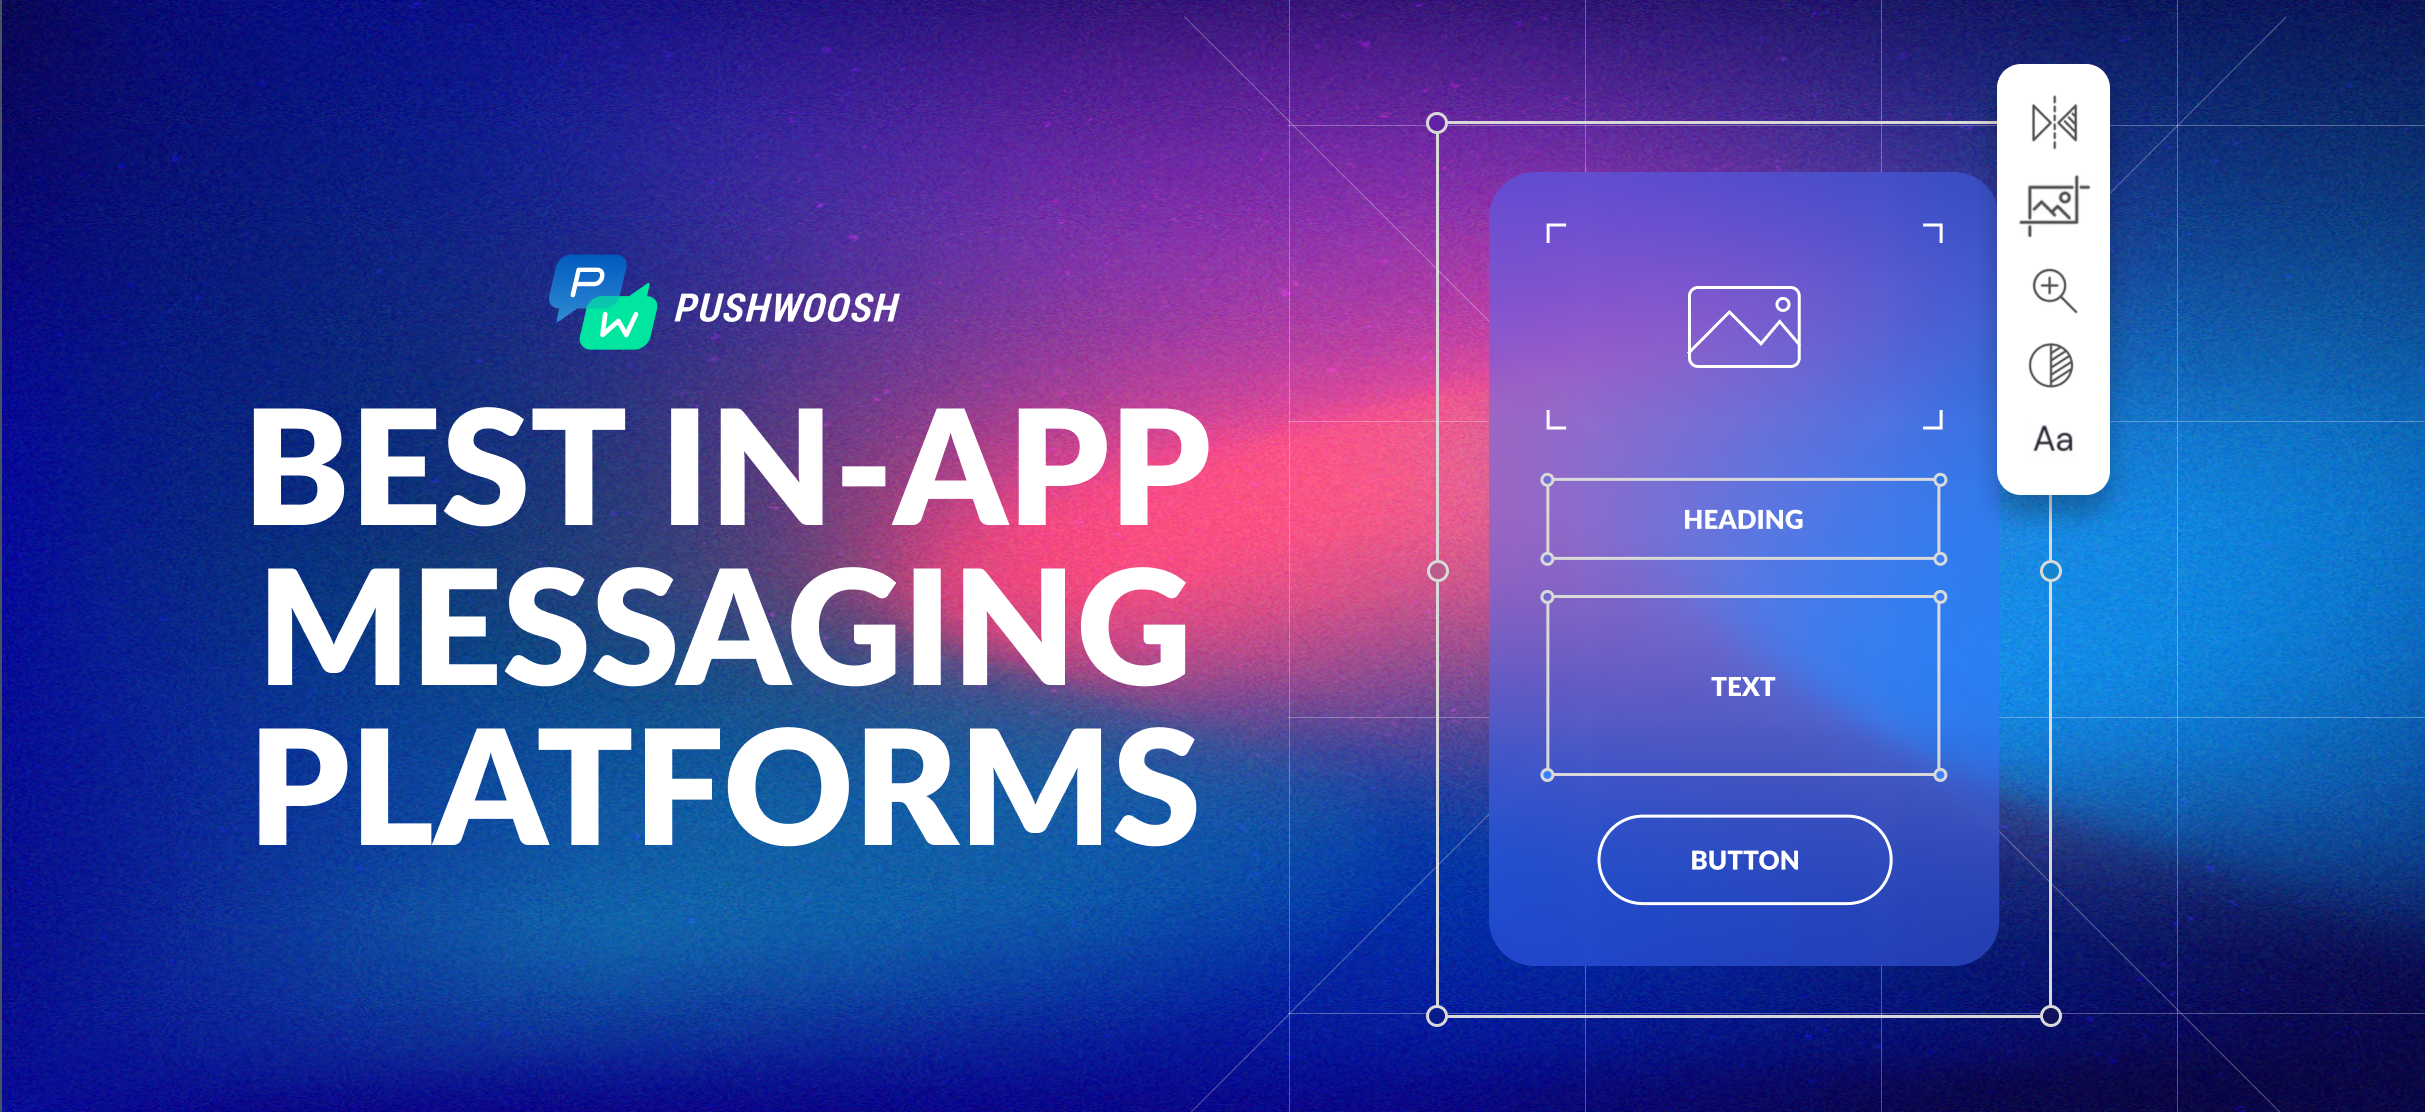 Best In-App Messaging Platforms: Choose Your Next Power Up Wisely